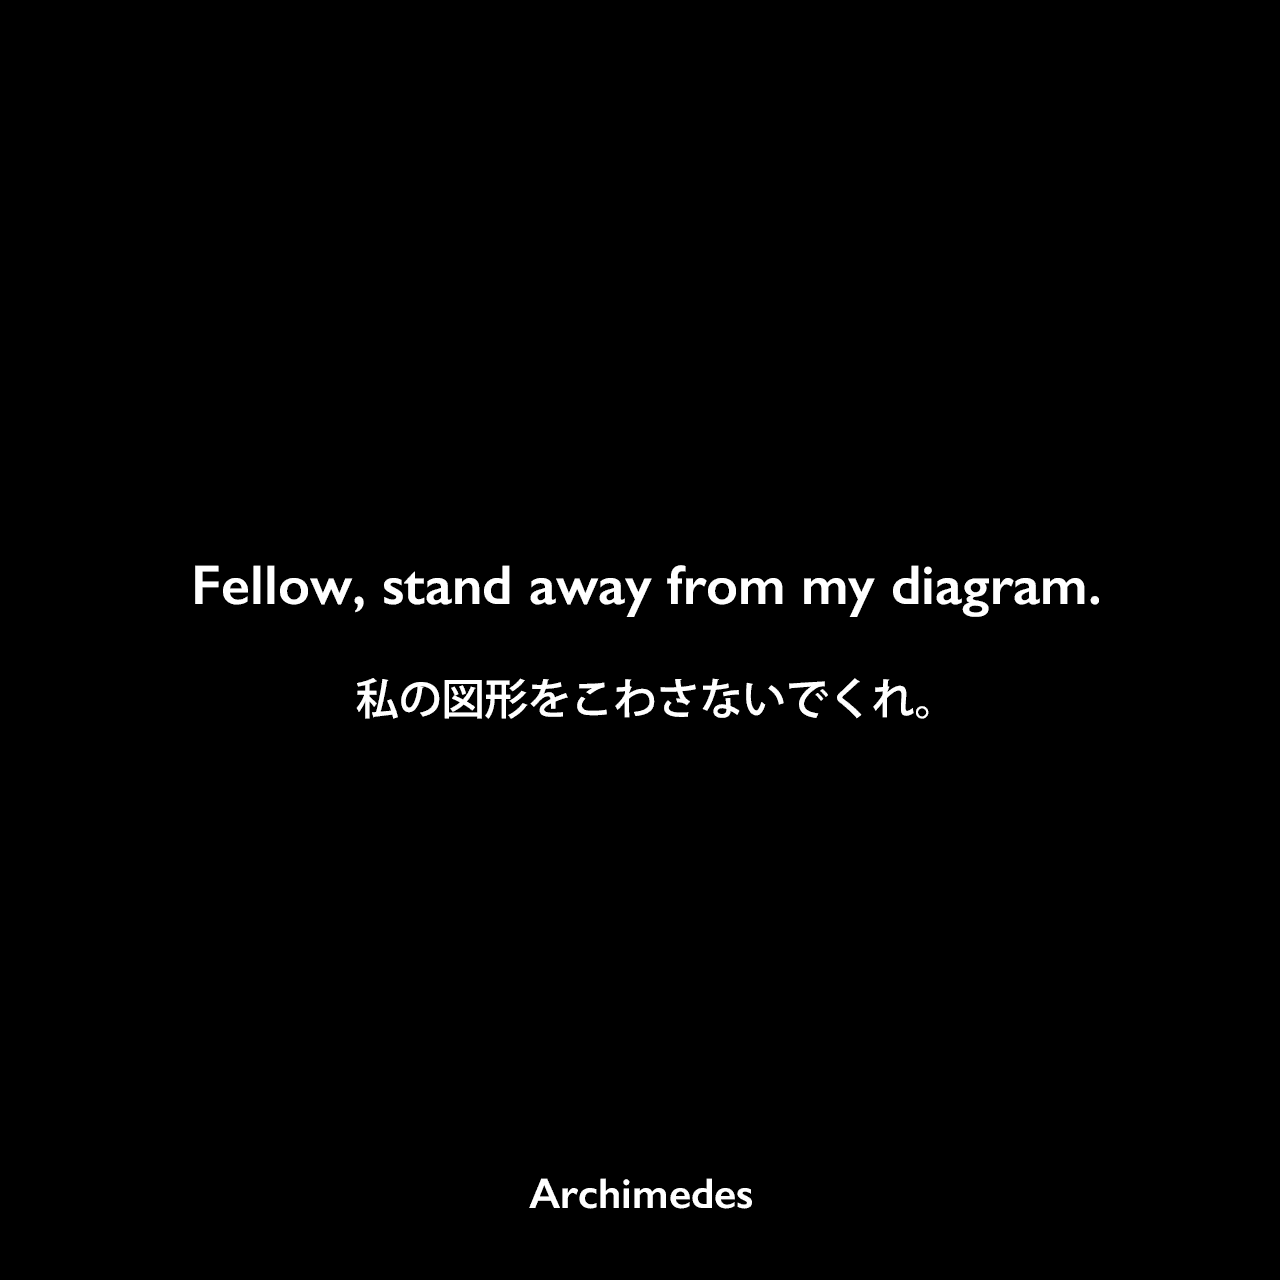 Fellow, stand away from my diagram.私の図形をこわさないでくれ。Archimedes